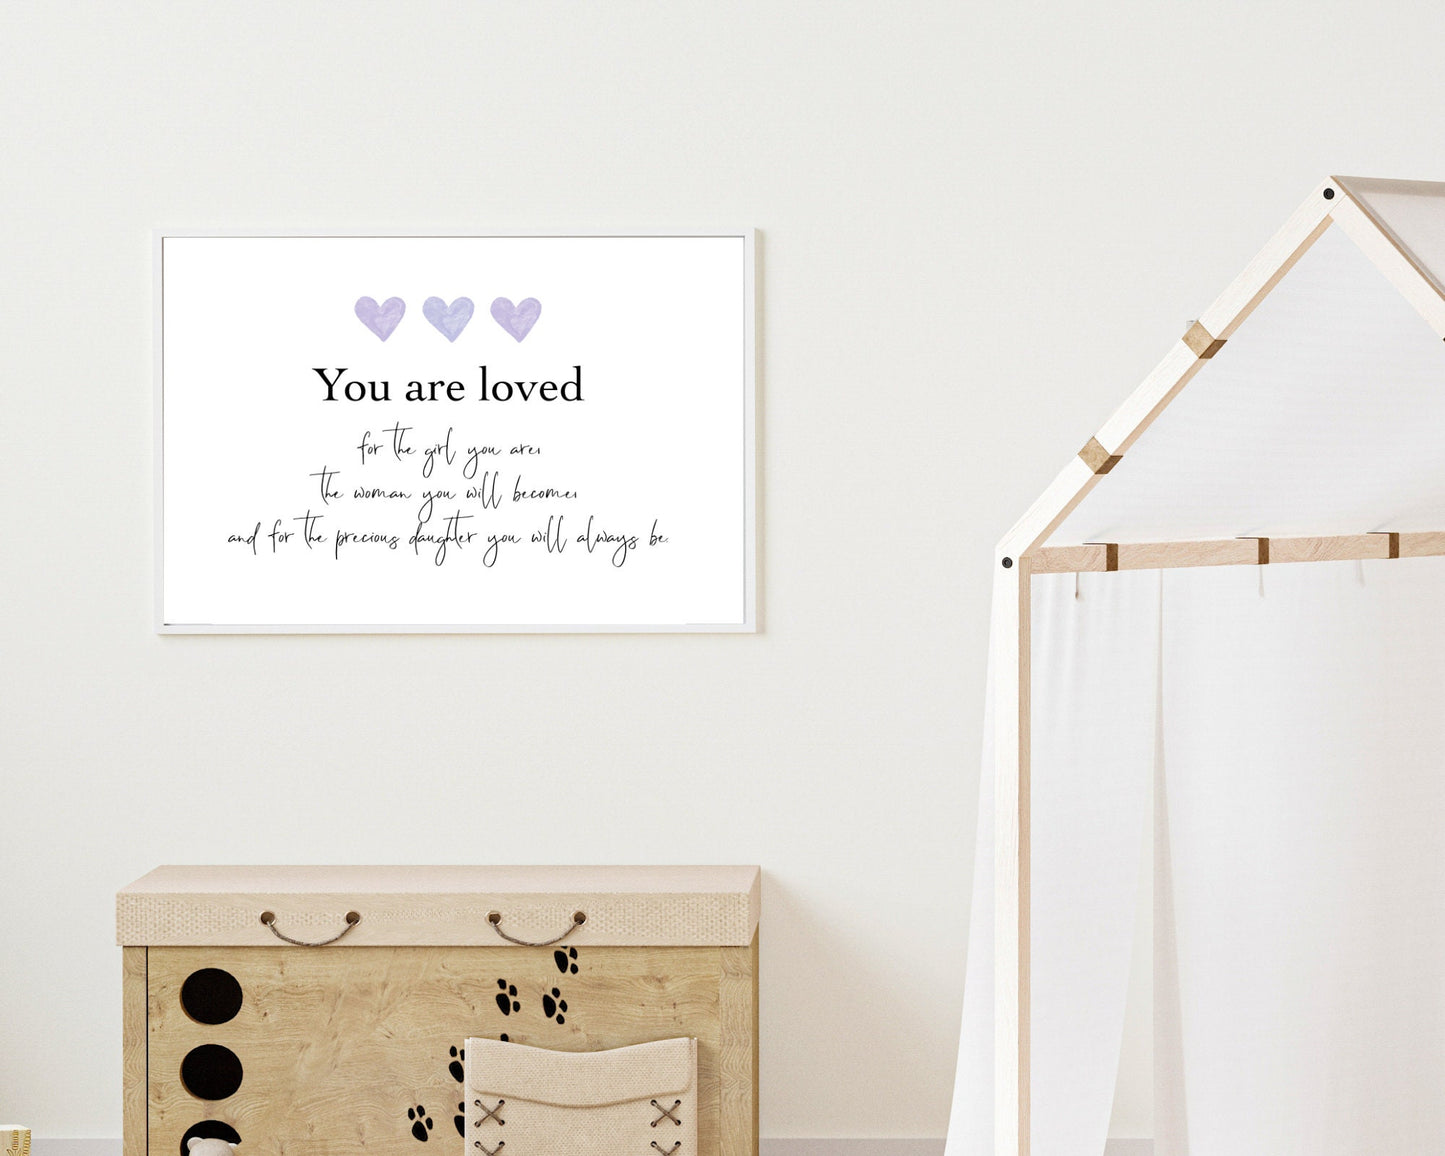 A little girl’s room digital poster that is hung on a wall and has three purple hearts at the top with a piece of writing that says: “You are loved for the girl you are, the woman you will become, and for the precious daughter you will always be.”